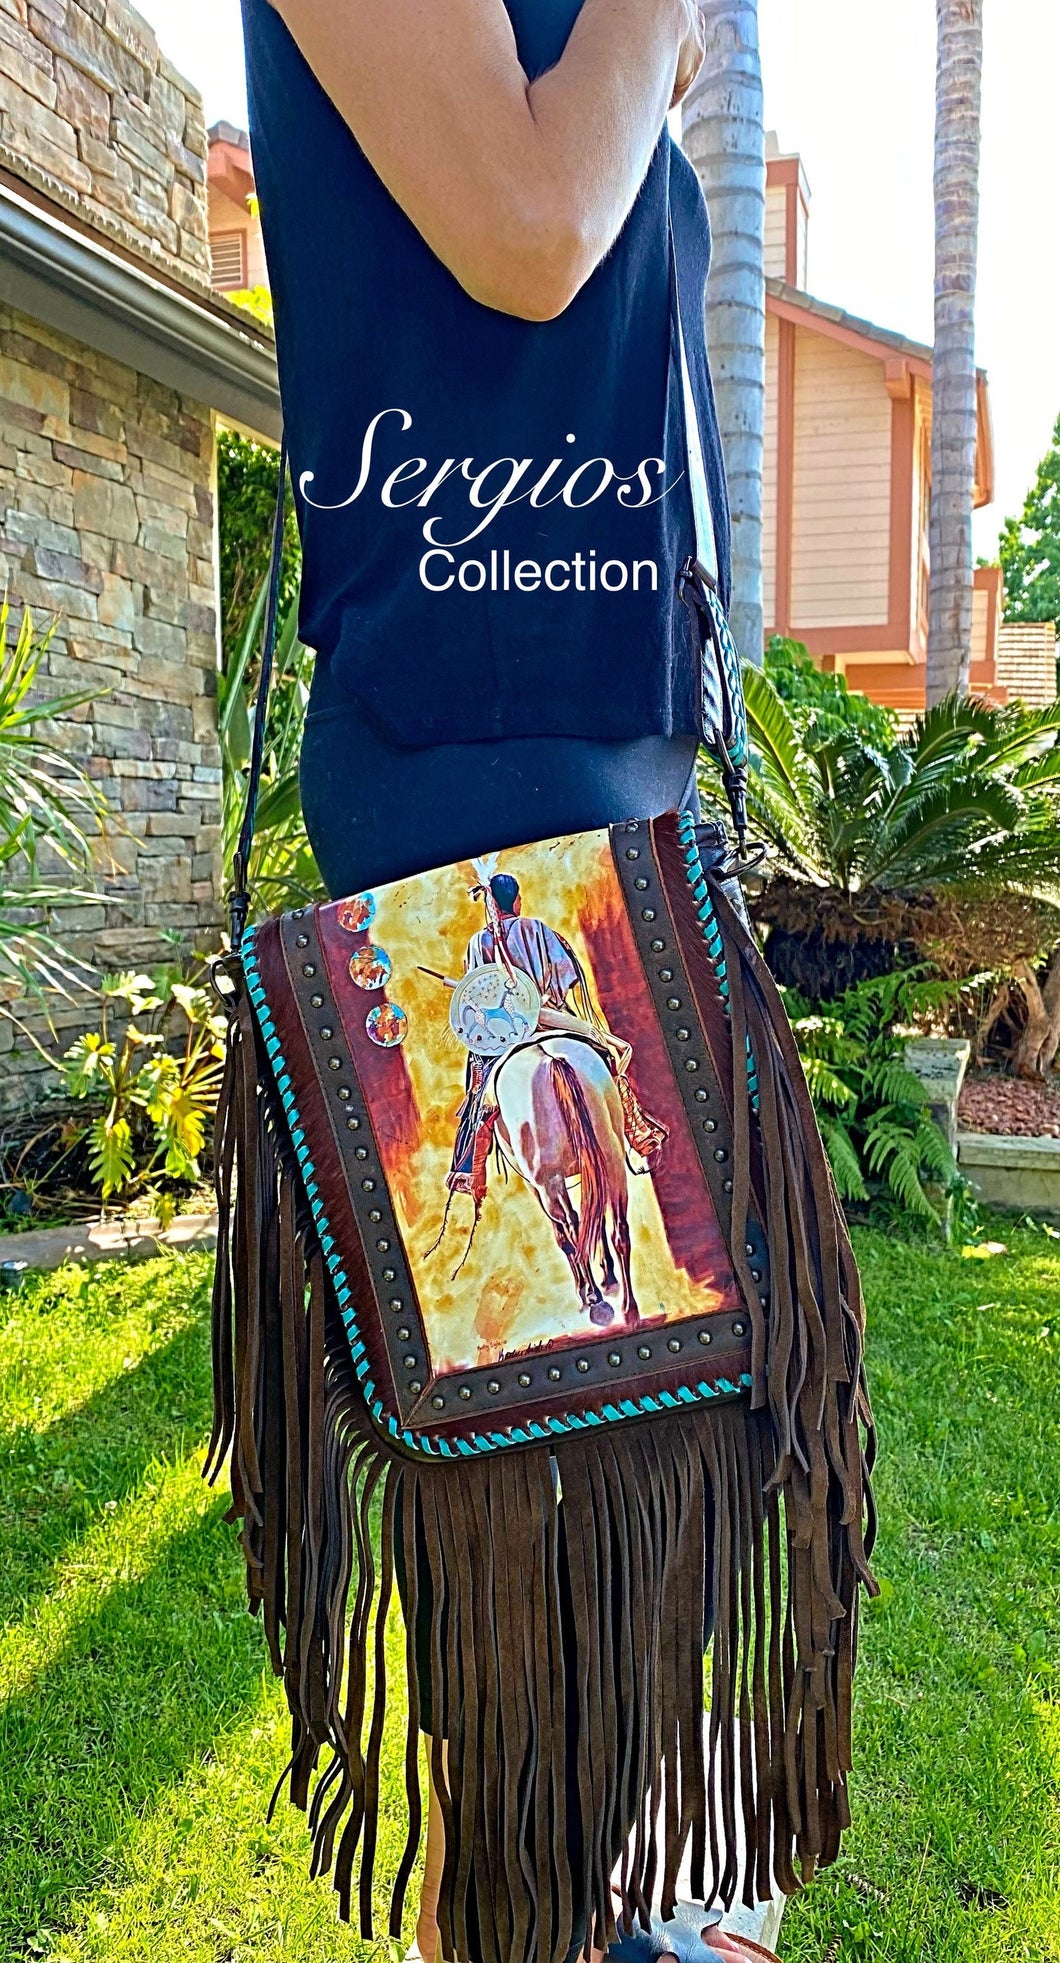 Kathy Sigle Art for Sergios Collection Handmade Soft Leather